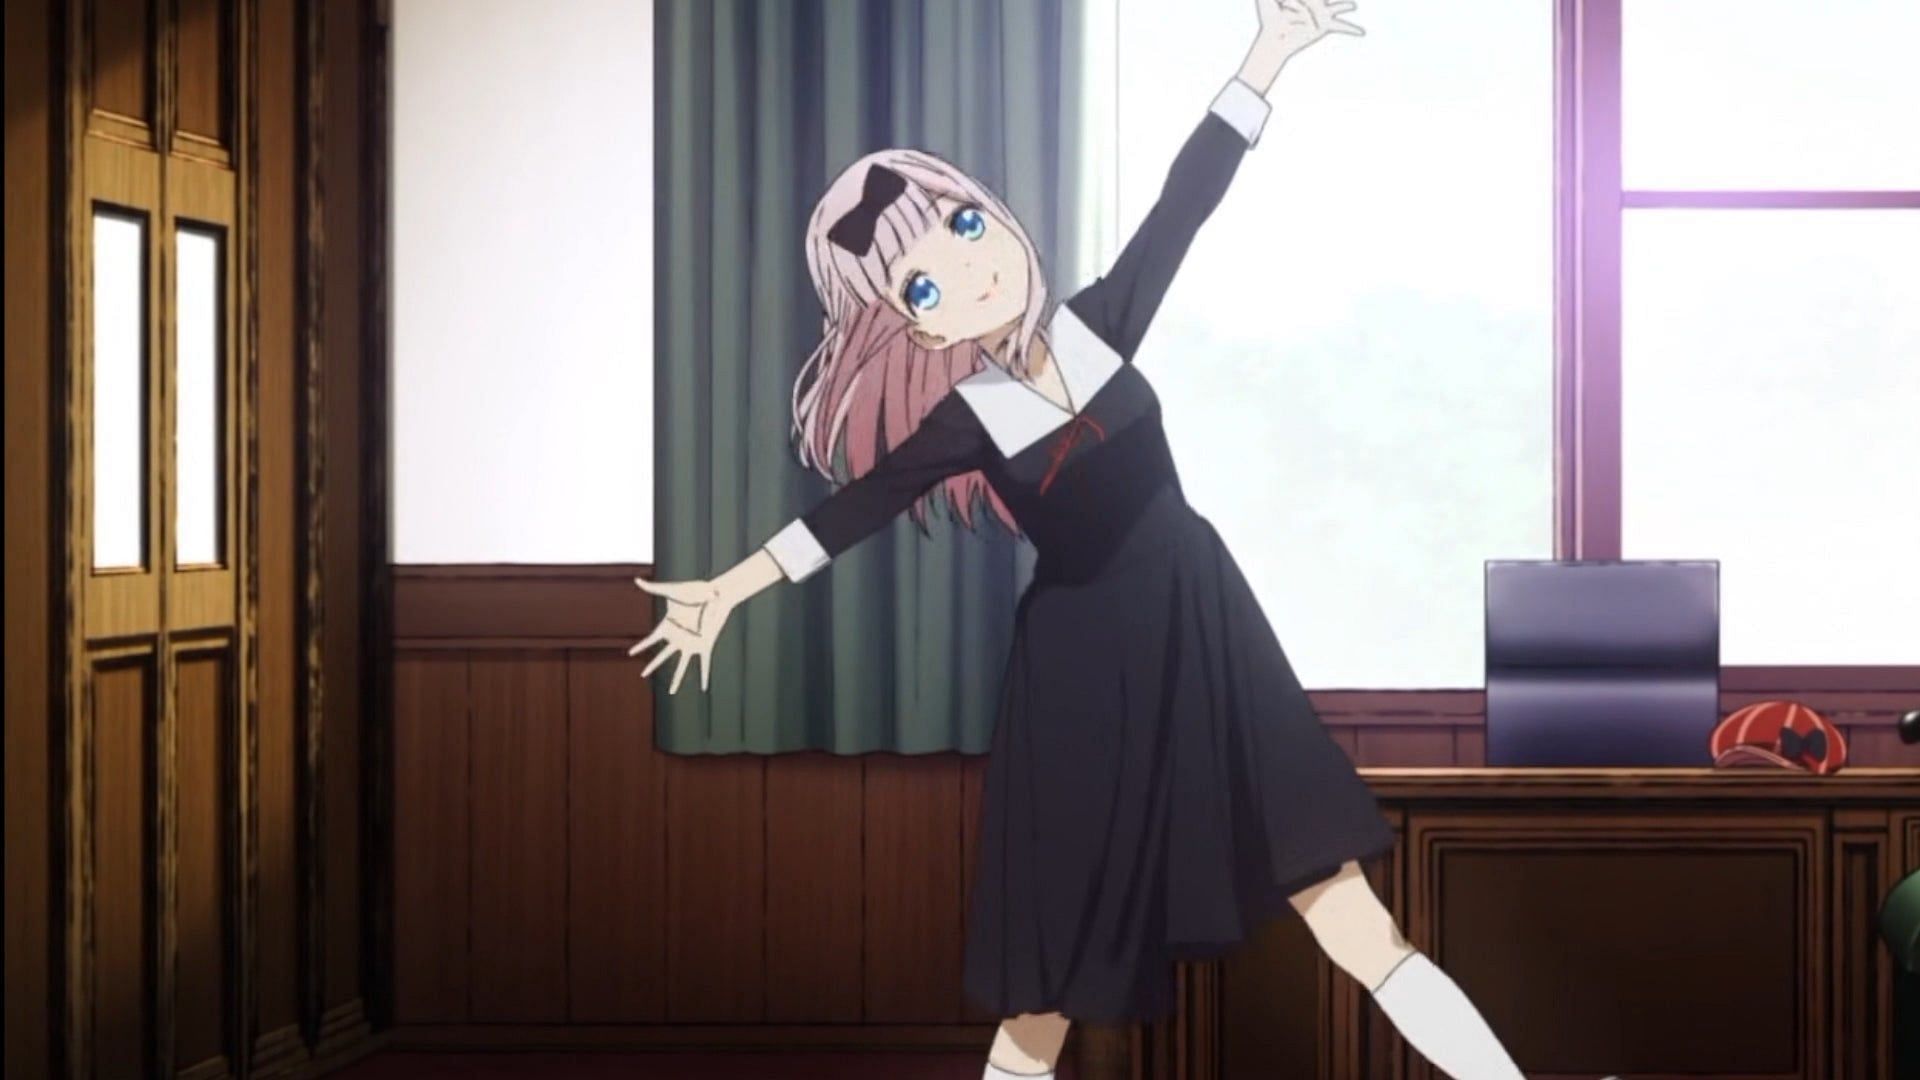 8 most iconic anime dances that everyone wants to learn